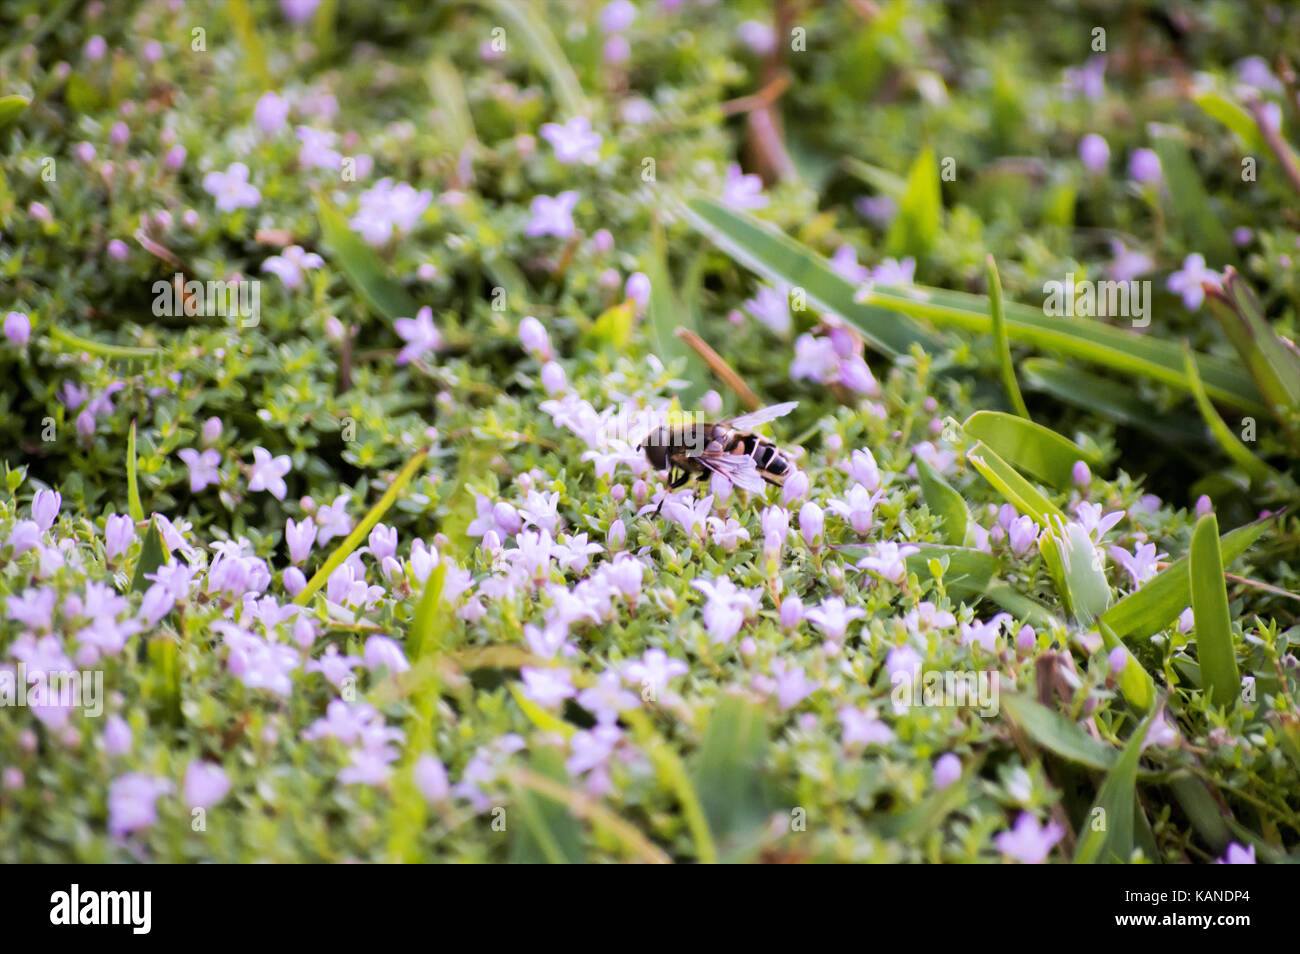 Snow in summer flowers with a pollinating honey bee. Stock Photo